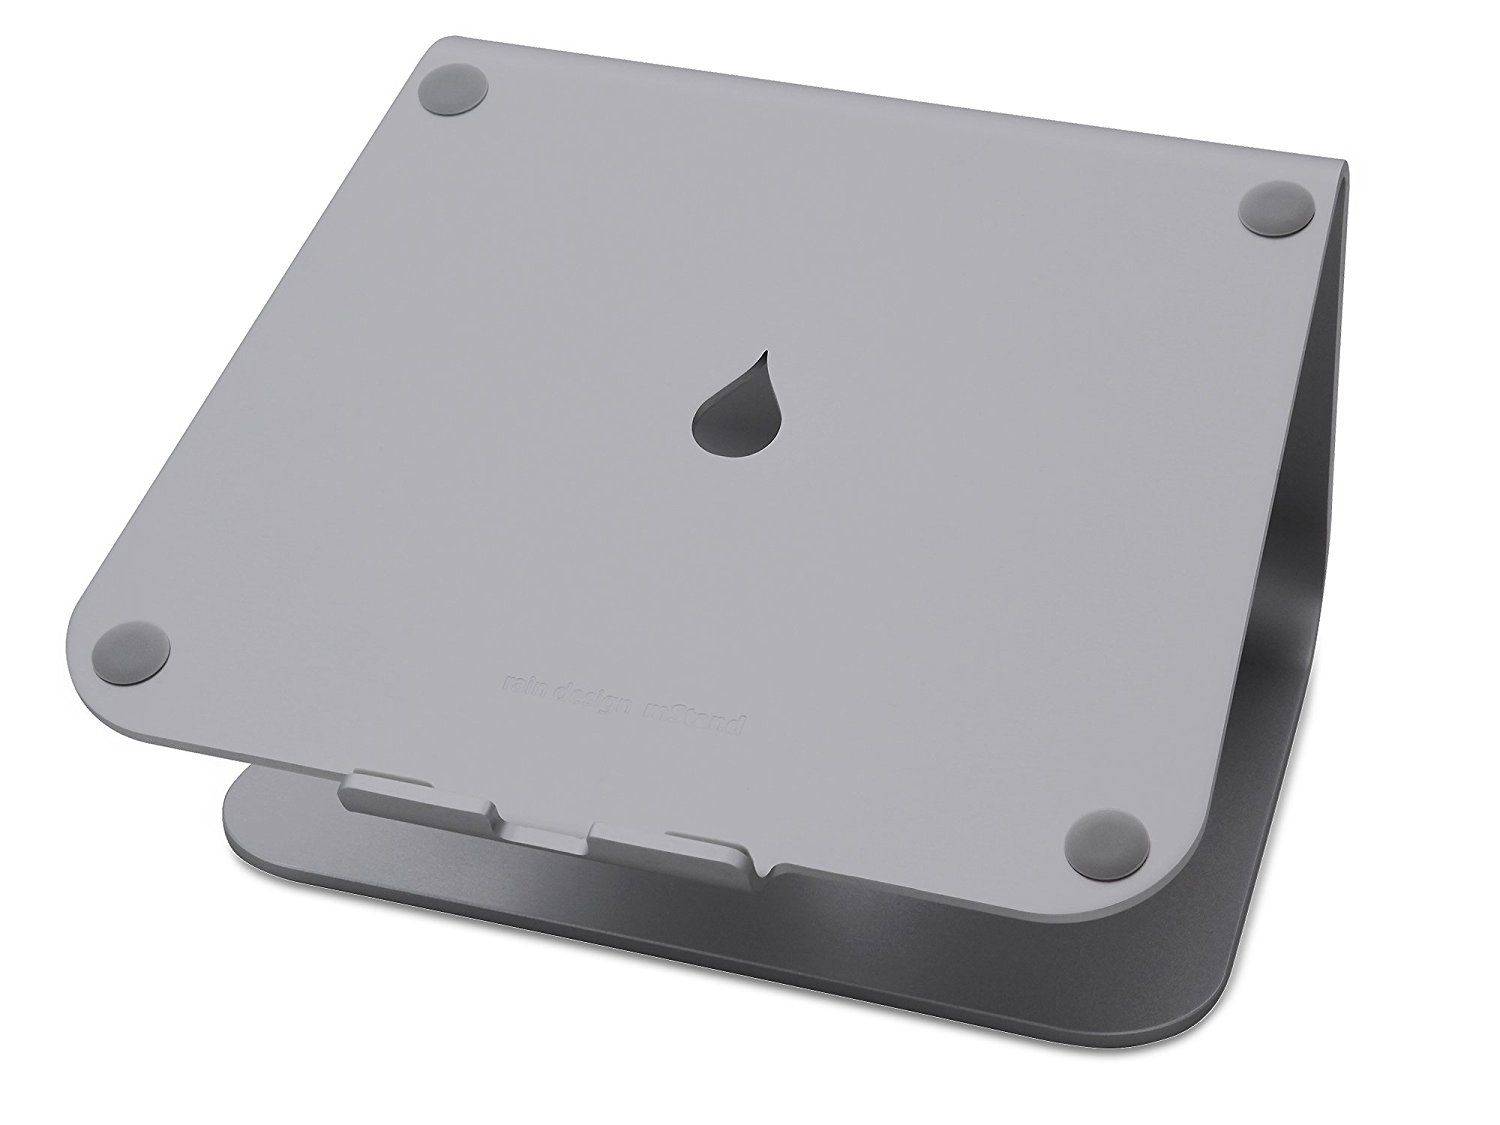 Rain Design mStand 360 for MacBooks - The Usual